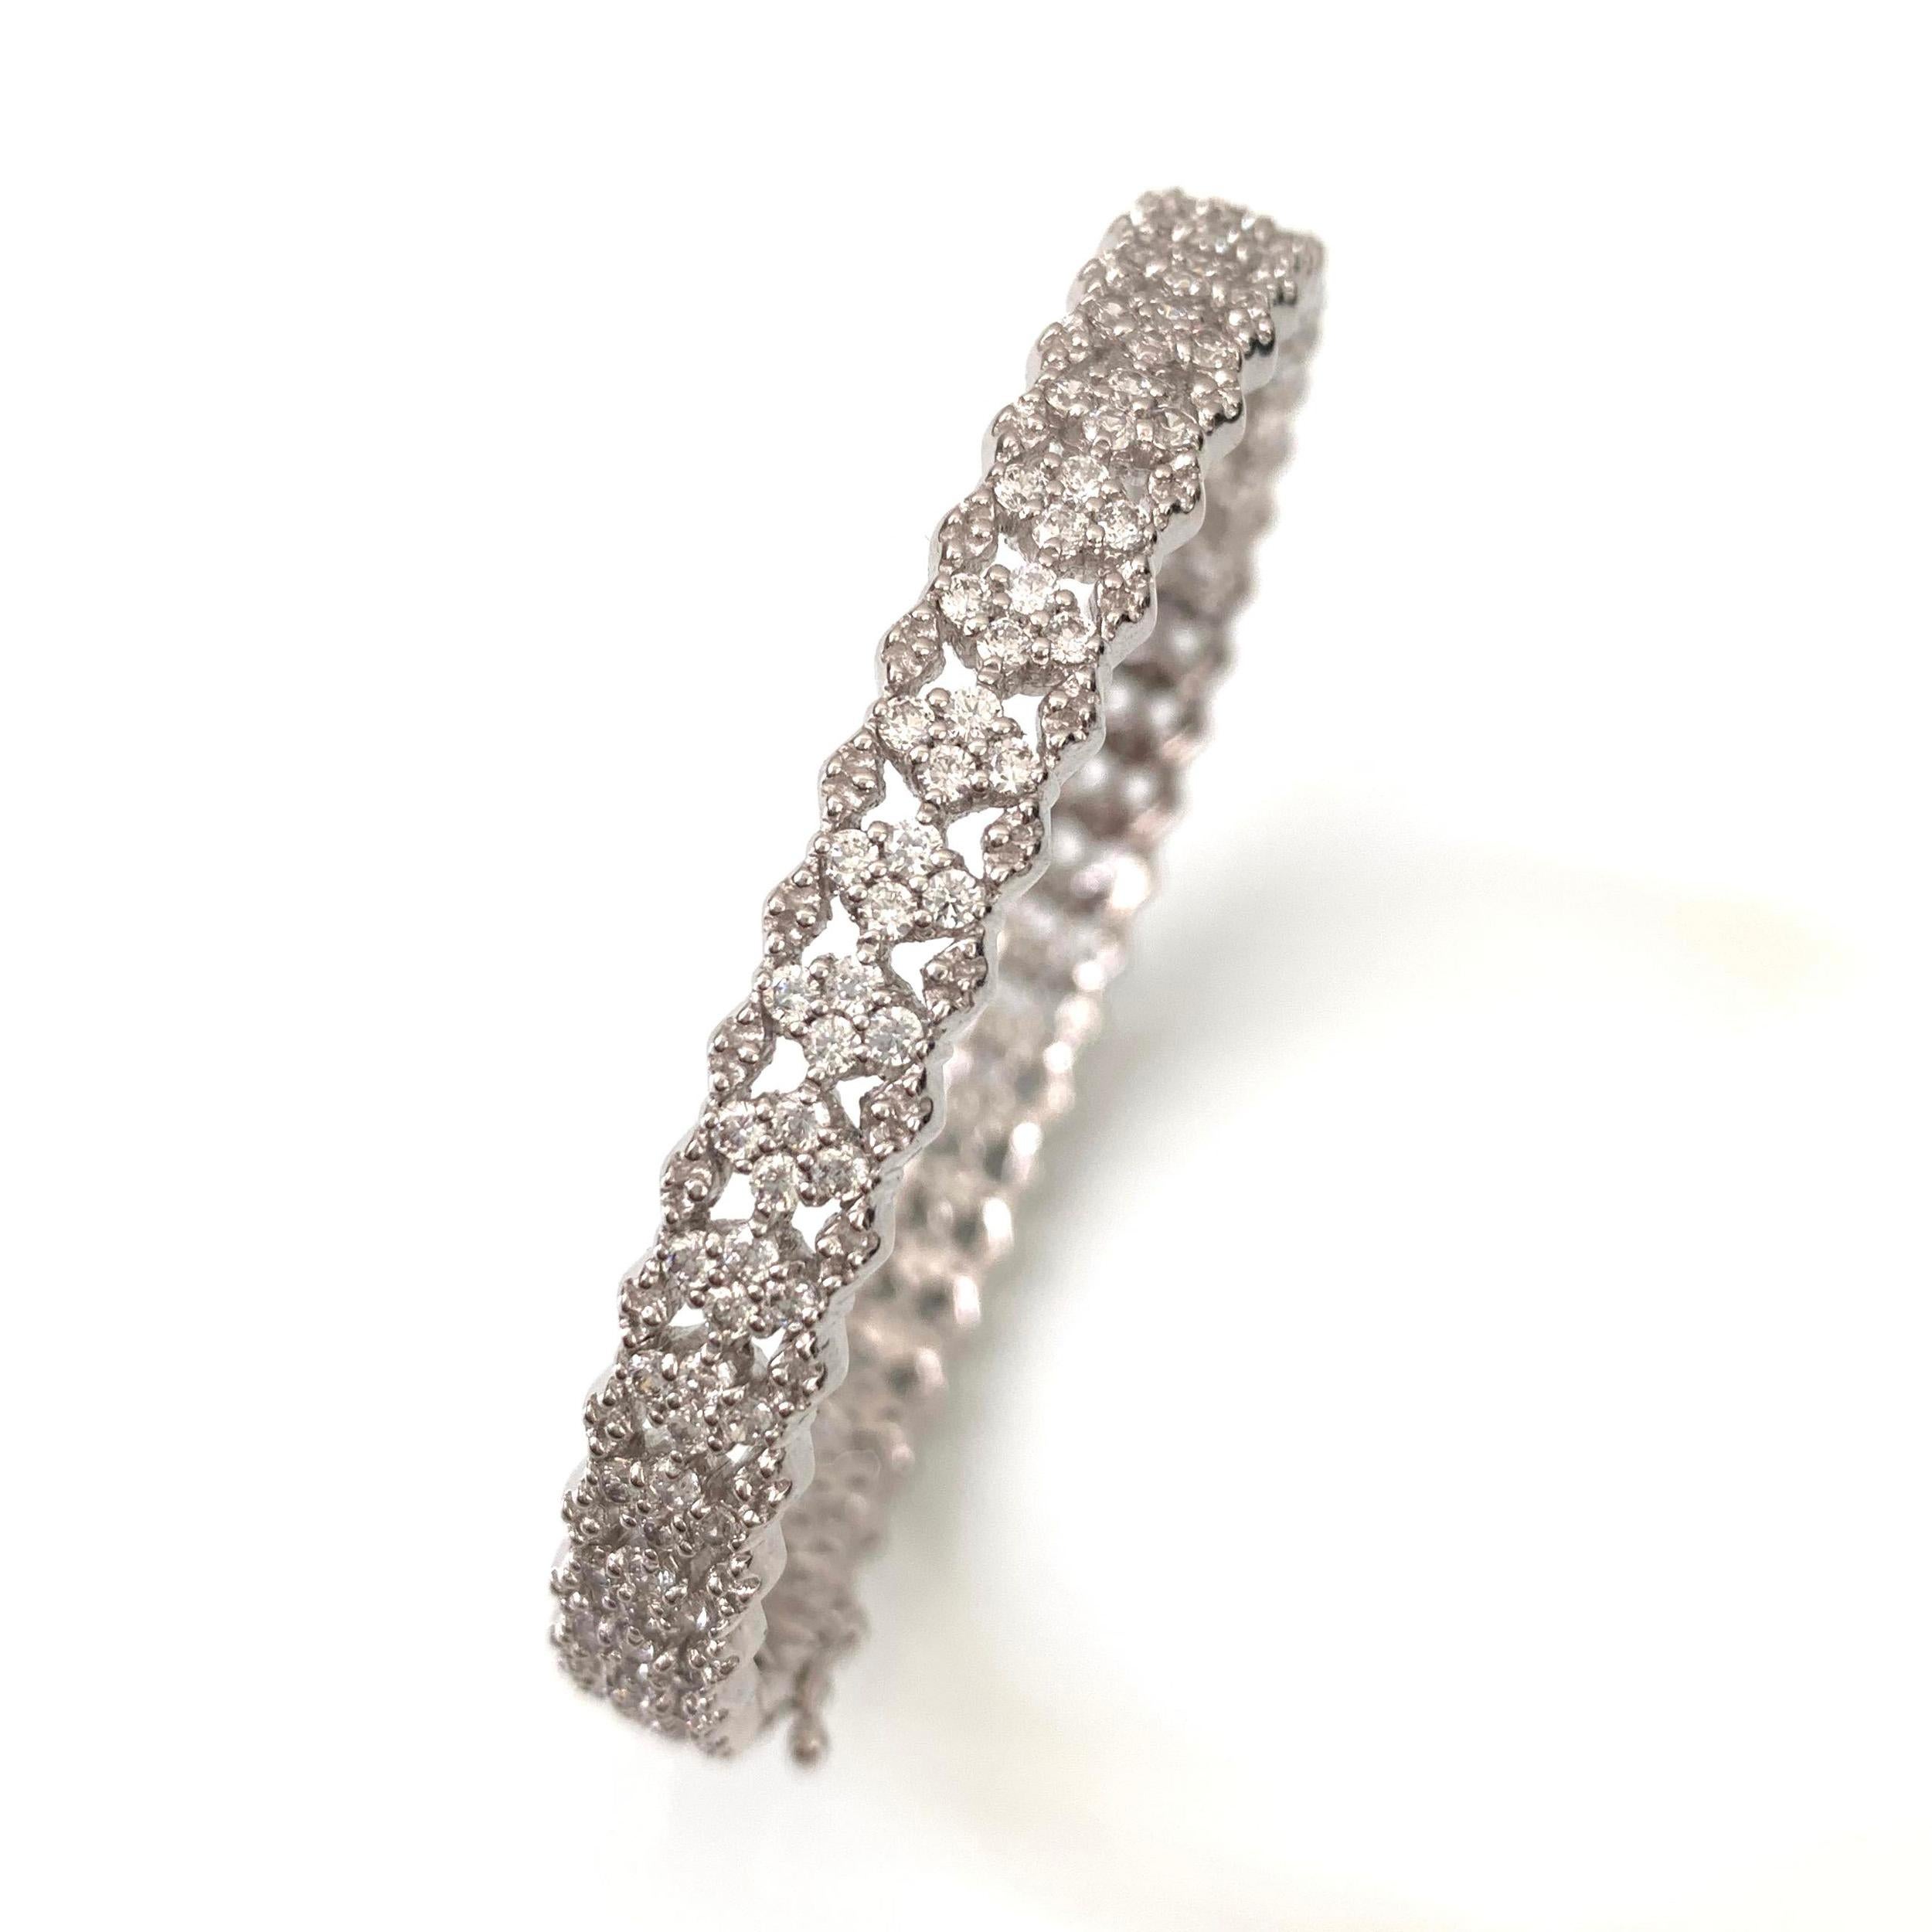 Beautiful skinny bracelet featuring a row of diamond shaped encrusted cubic zirconia with silver edged pattern. Push clasp closure with double '8' safety locks. Platinum Rhodium plating over sterling silver. Marked: NUM 925.

Bracelet is 0.25